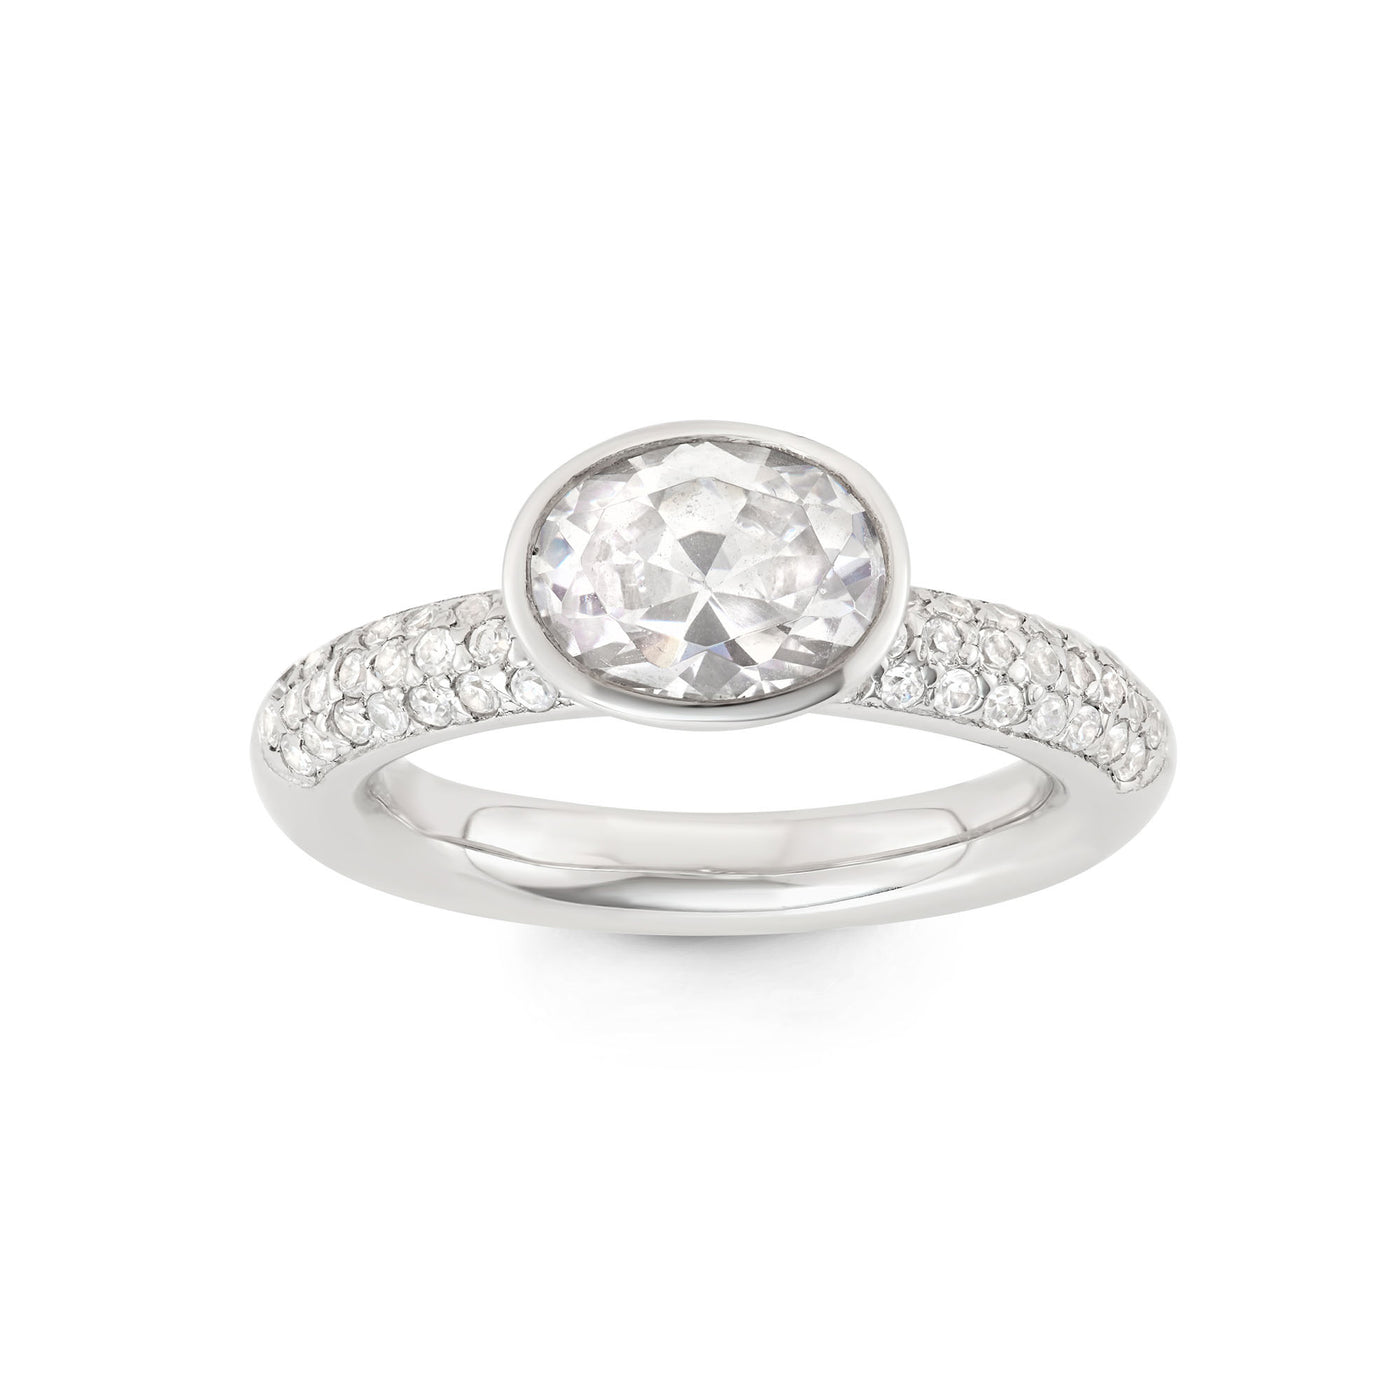 Rebecca Sloane Silver Ring With White Pave CZ and White Oval